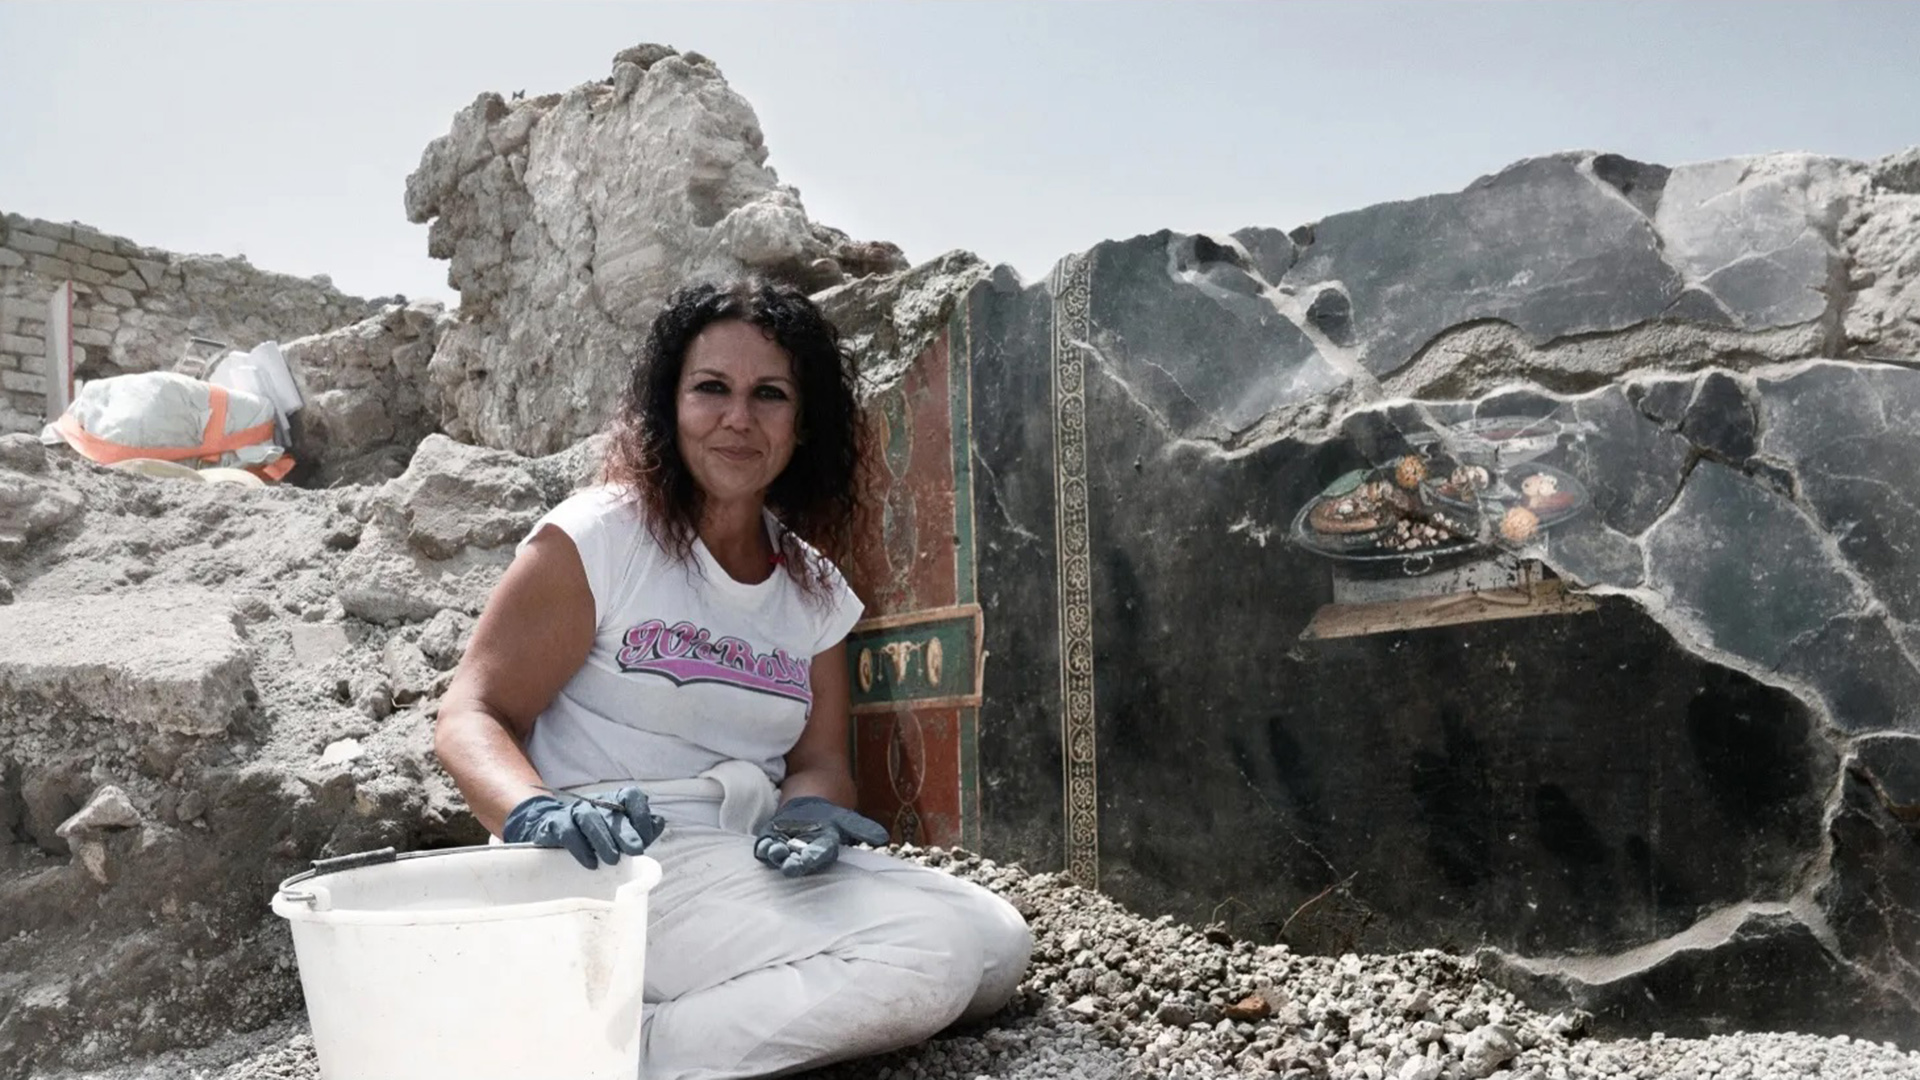 A woman wearing work gloves crouches down near a bucket in an excavation site at Pompeii, Italy.